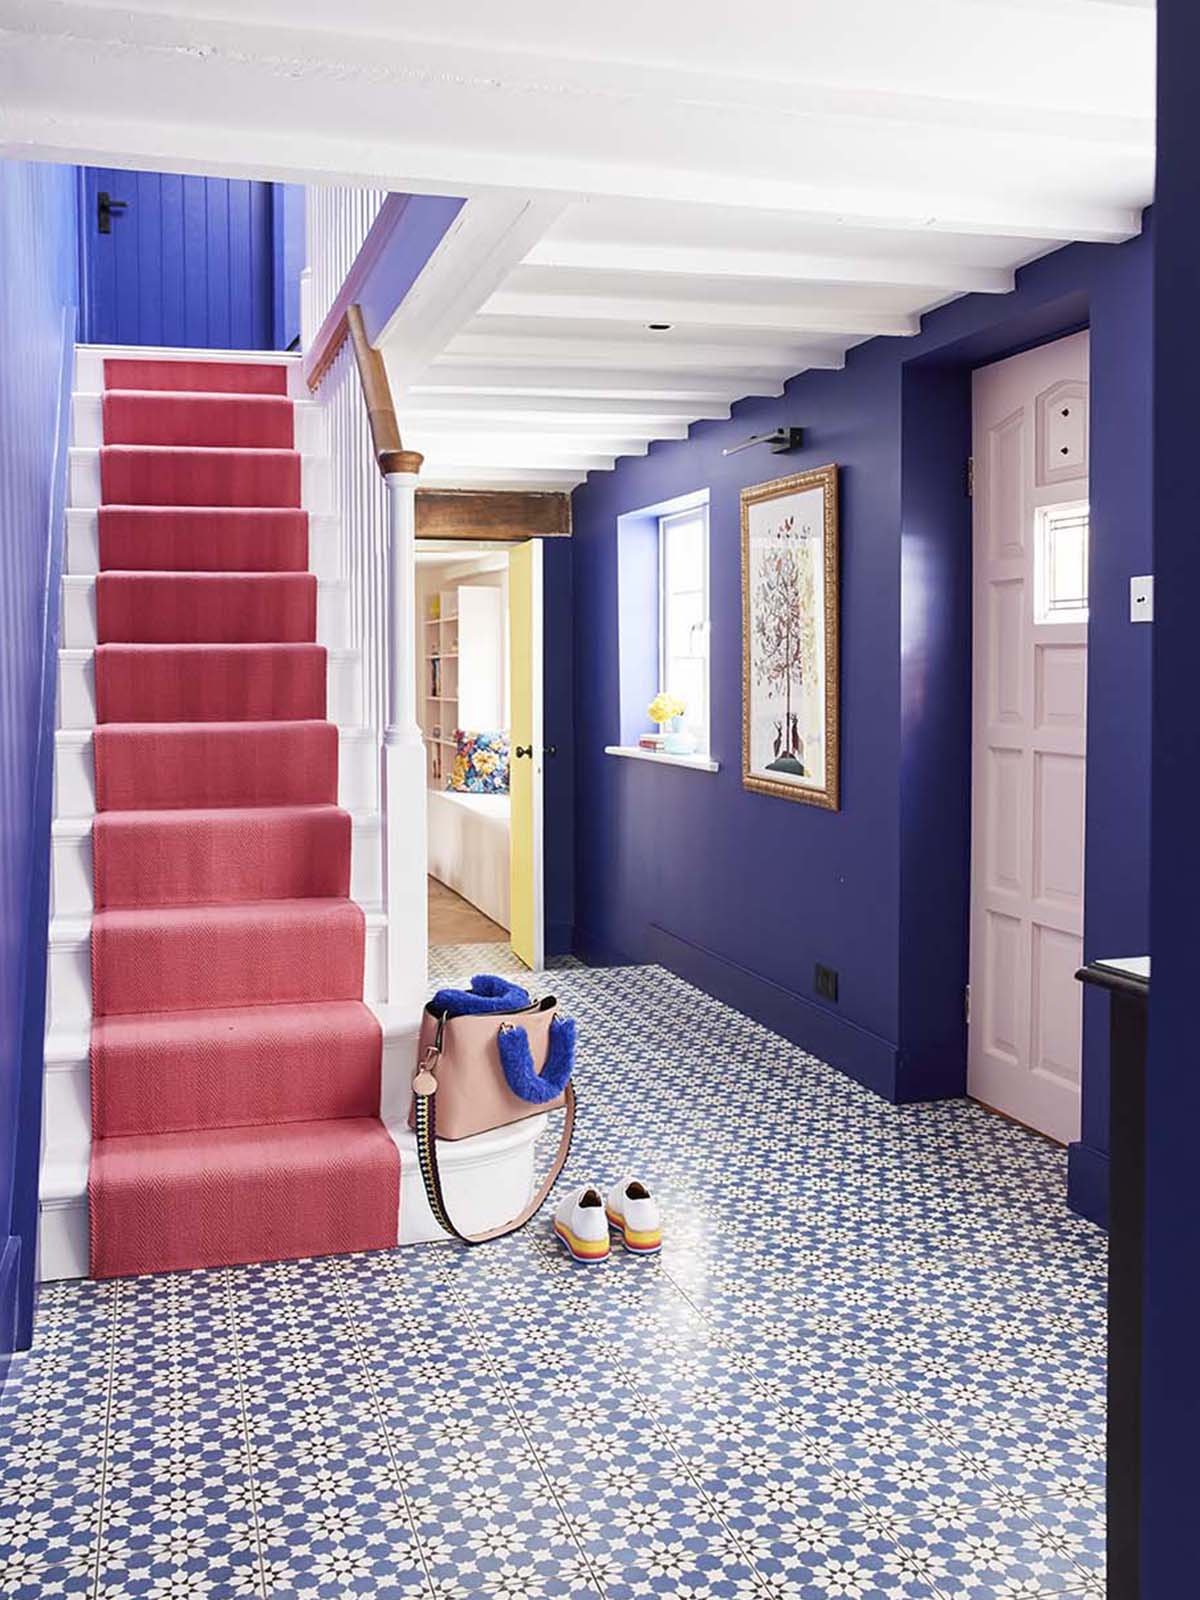 At home with interior designer Sophie Robinson. Her bright and cheery hallway has dramatic bluewalls painted in Lapis by Zoffany, blue patterned tiles by Claybrook and a bright Rose stair runner by Roger Oates